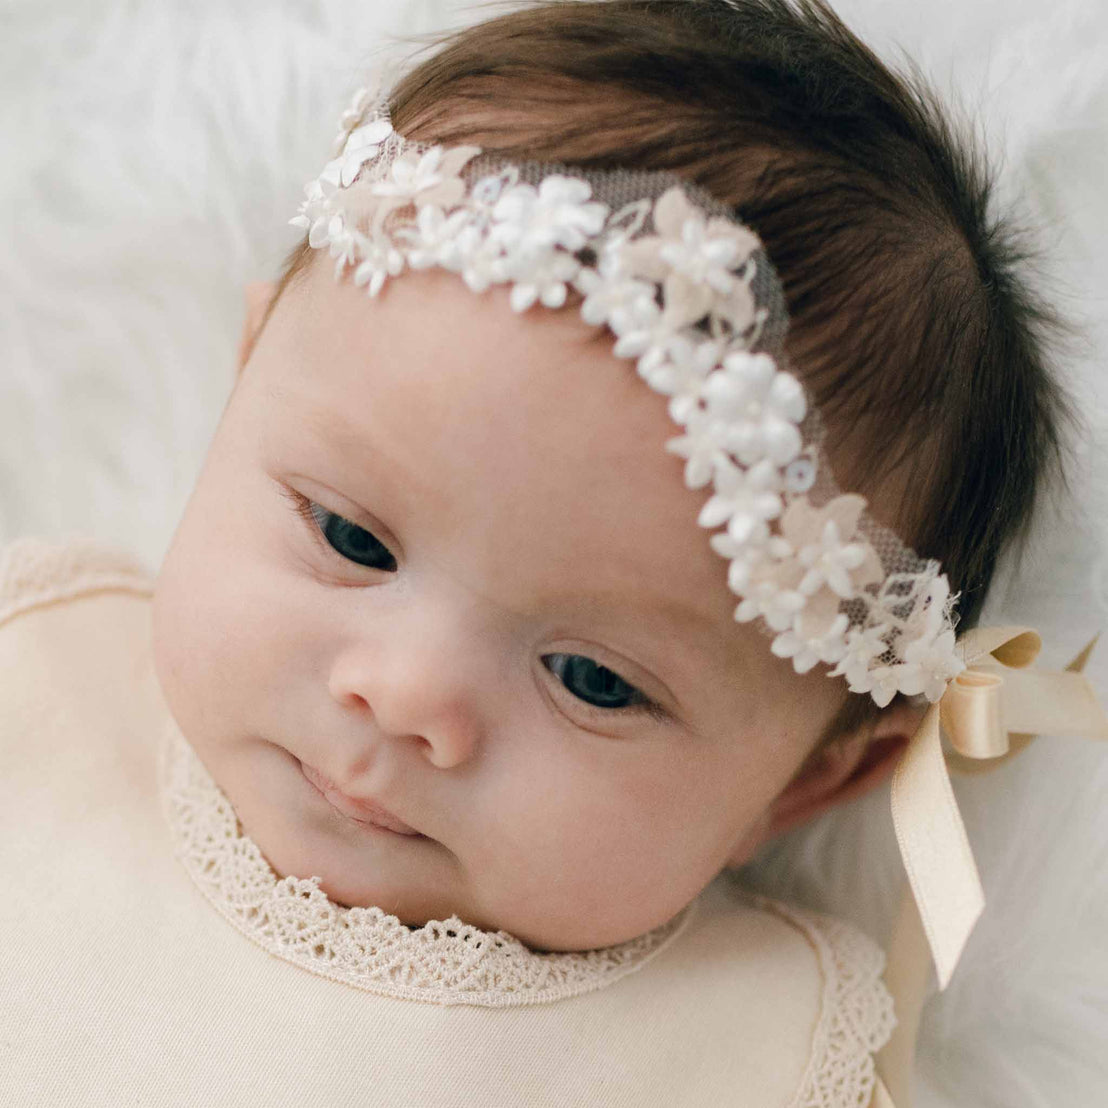 Close-up of a baby with blue eyes wearing the Mia Headband, featuring floral and pearlesque beading, along with the Mia Newborn Bib with lace details, lying on a soft white blanket.